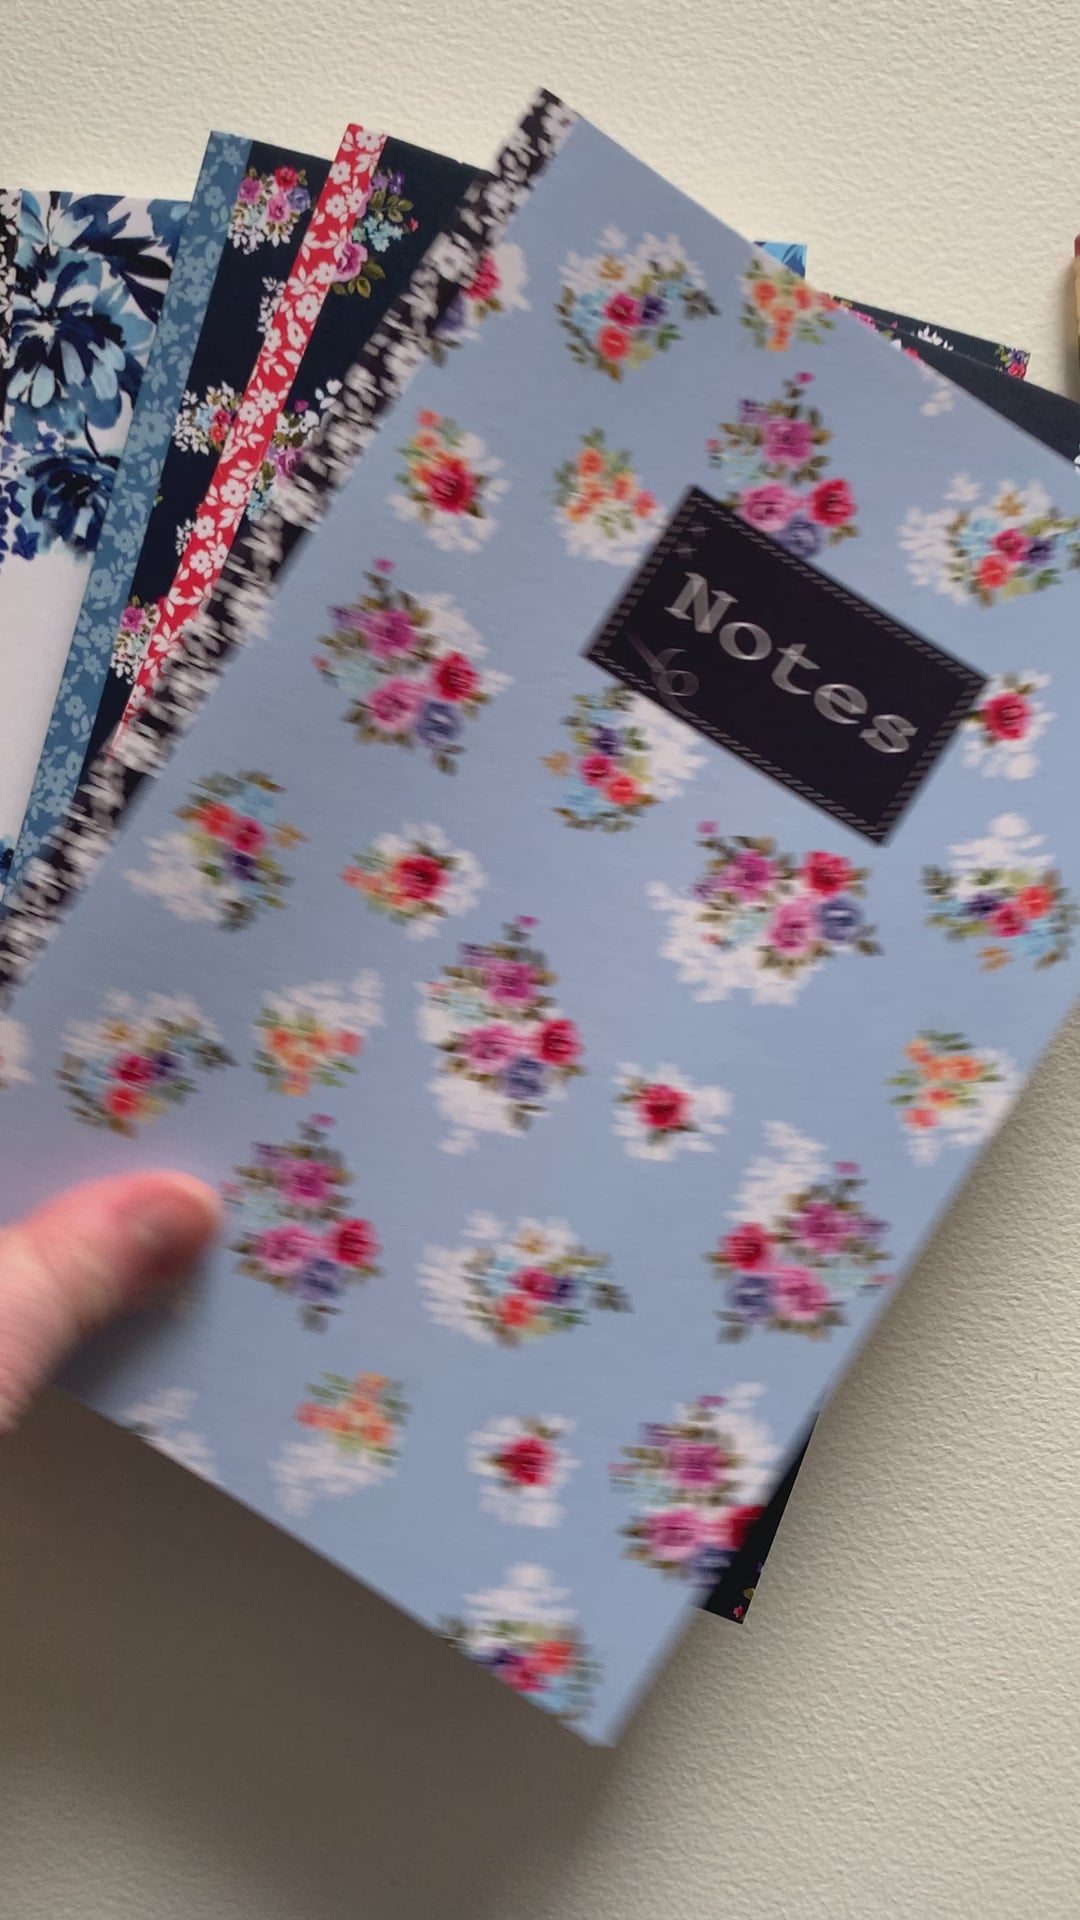 Navy floral notebook